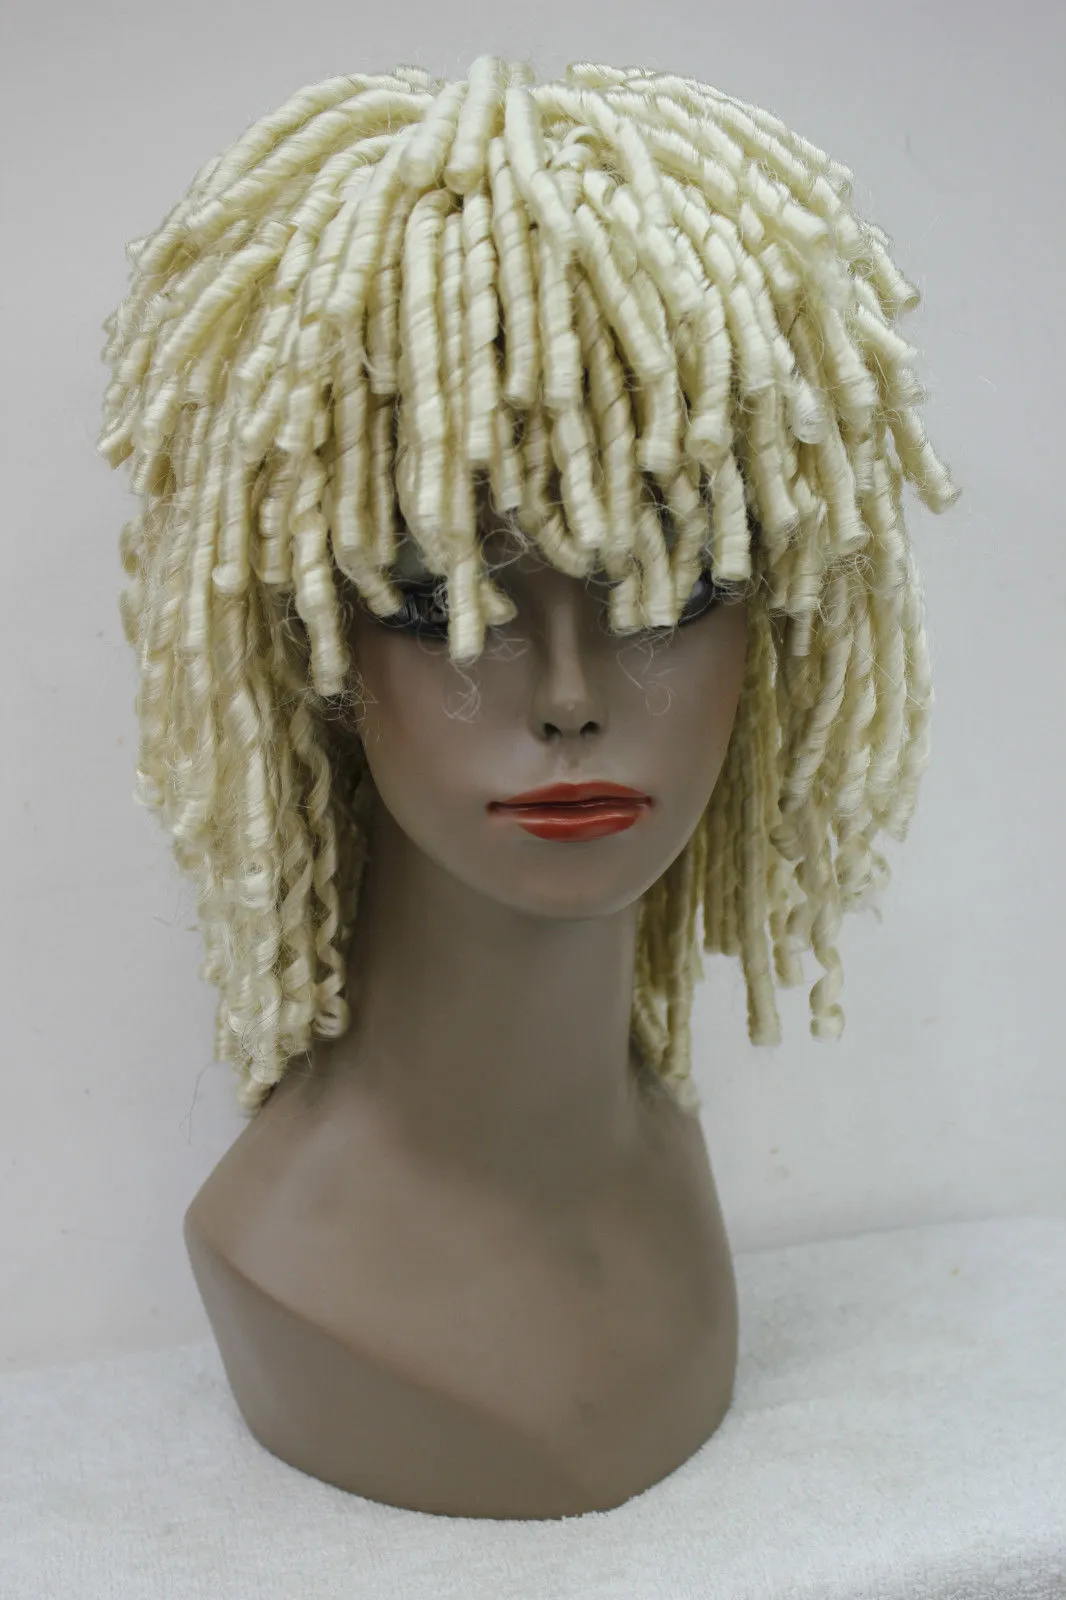 perruques blondes de style africain femmes dame perruques DREADLOCKS RUUD GULLIT perruque